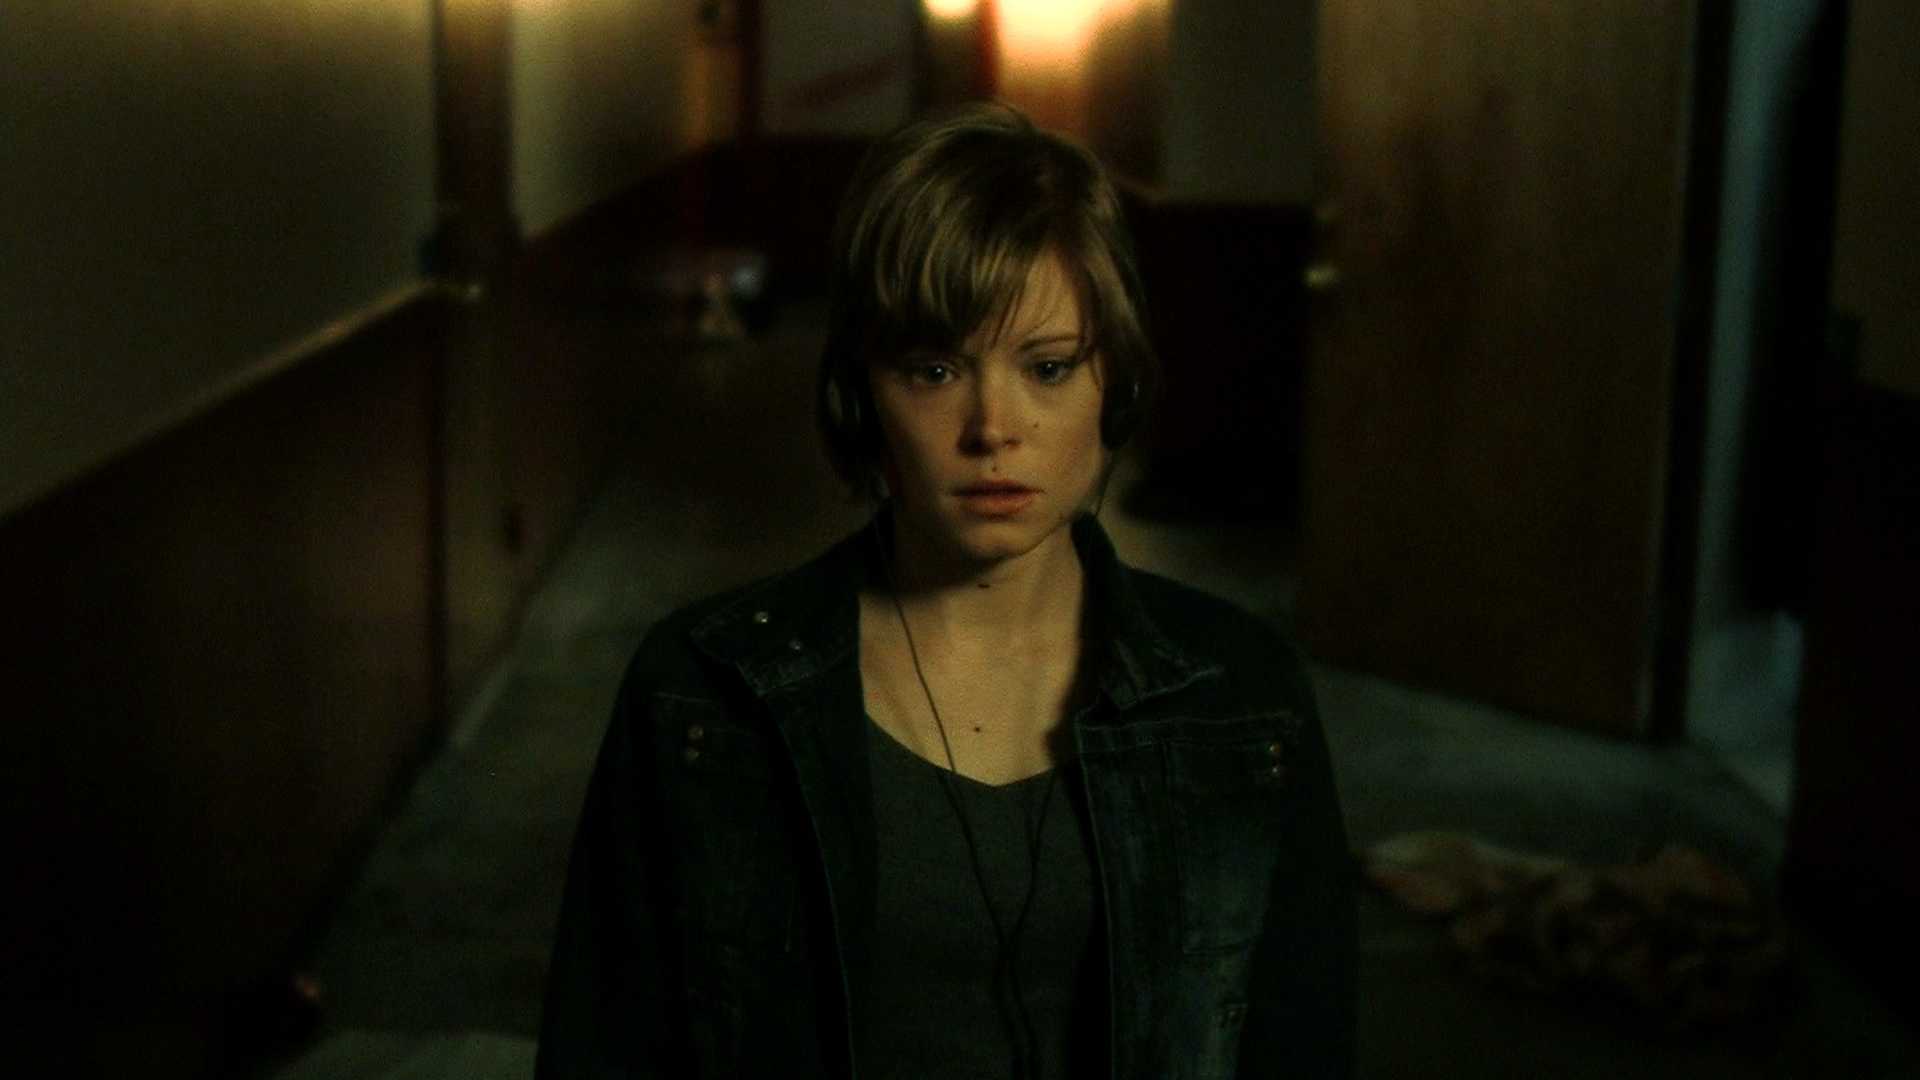 Maya (Anessa Ramsey) ventures out of her apartment in The Signal (2007)